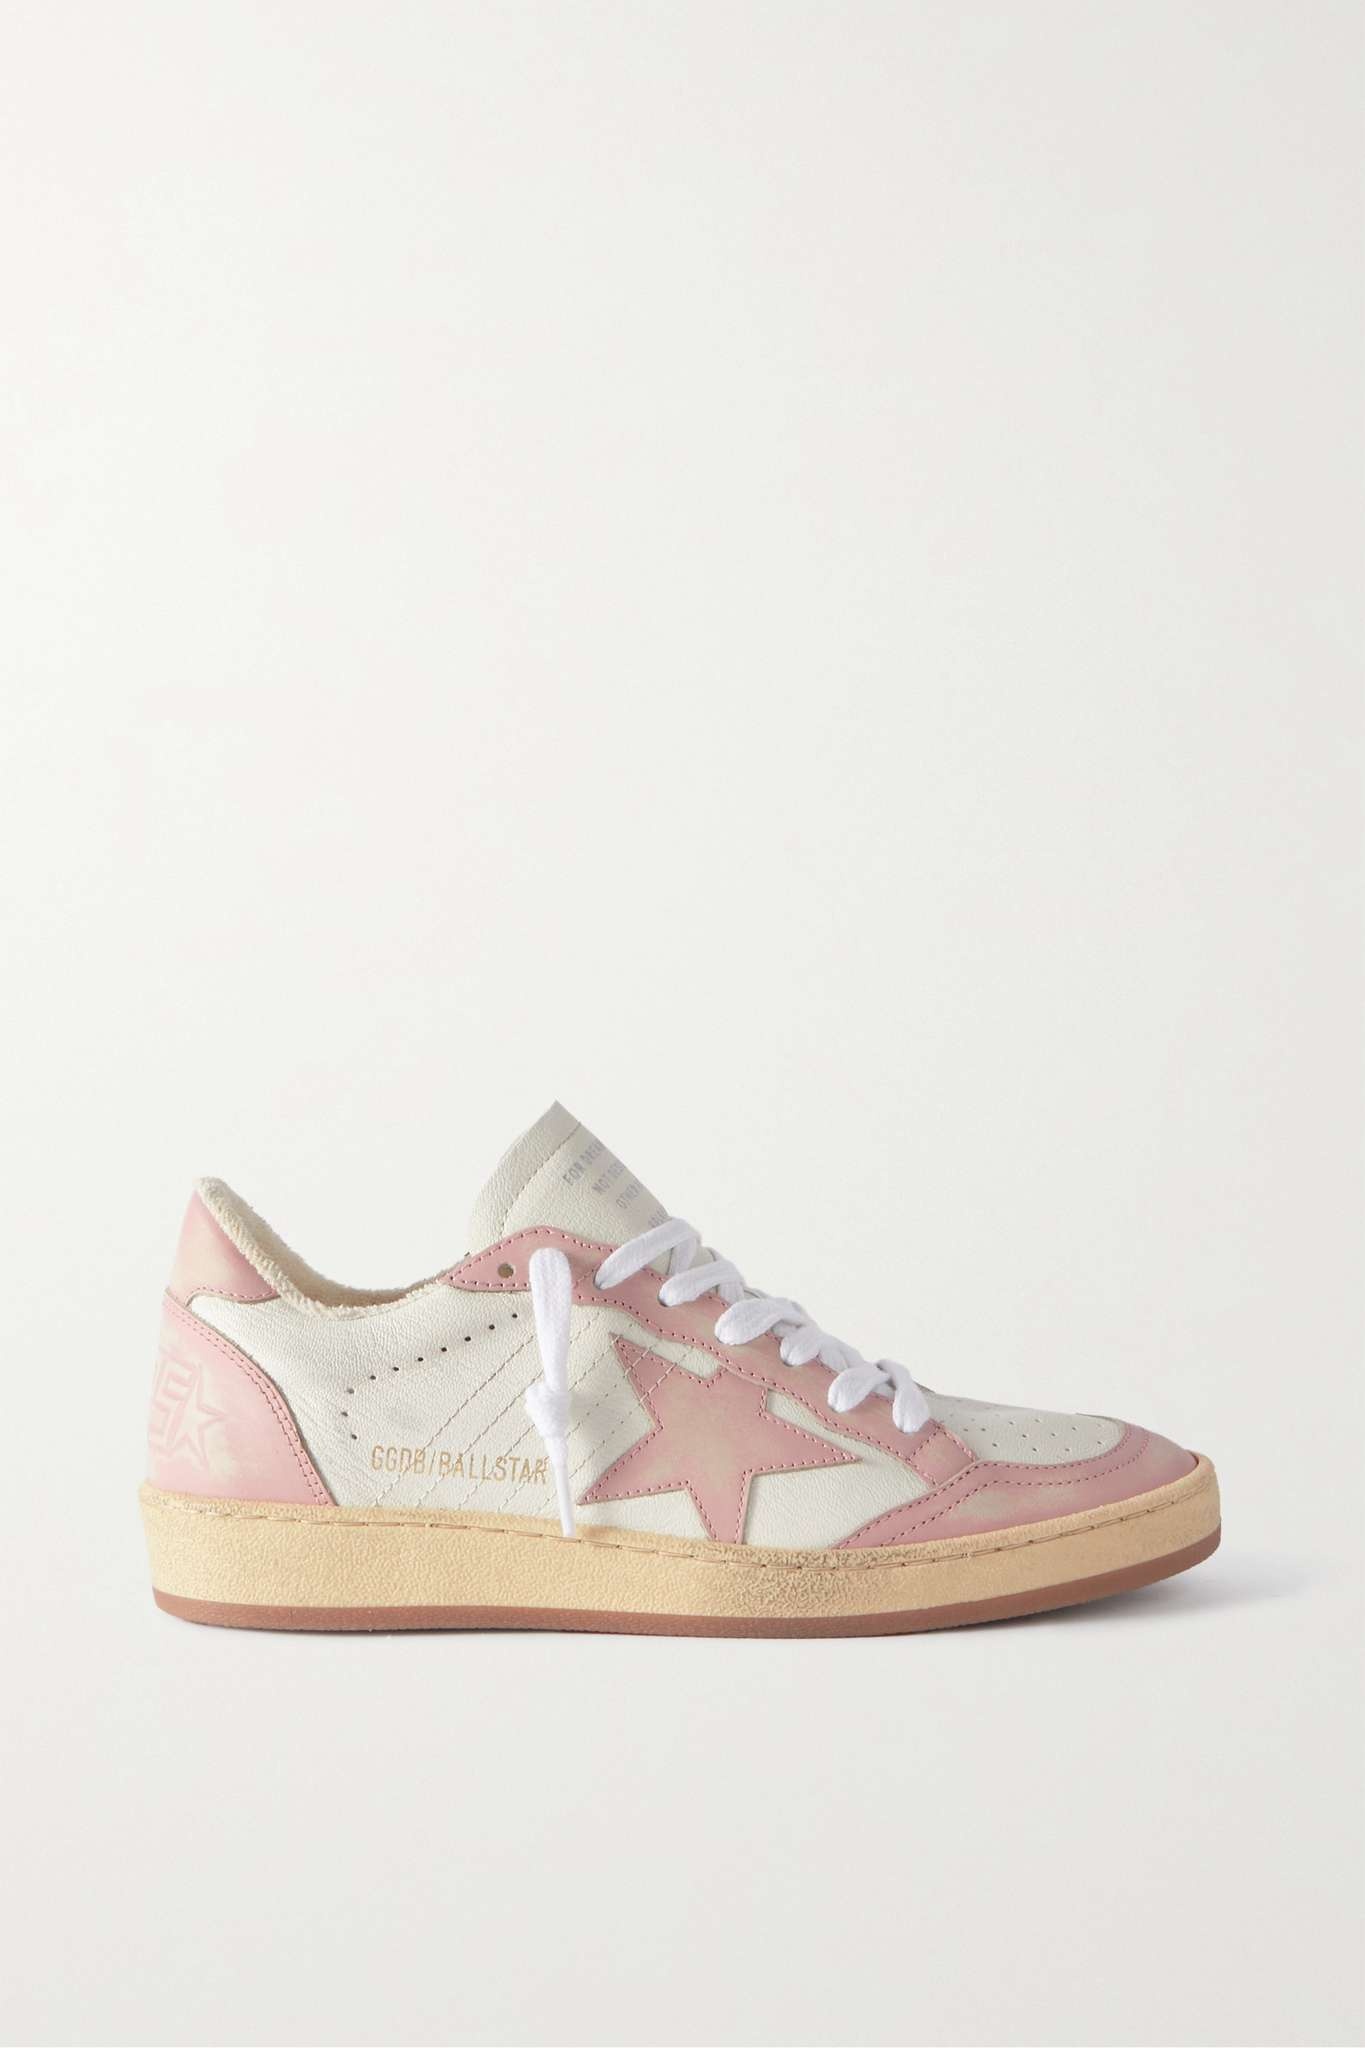 Ball Star distressed leather sneakers - 1